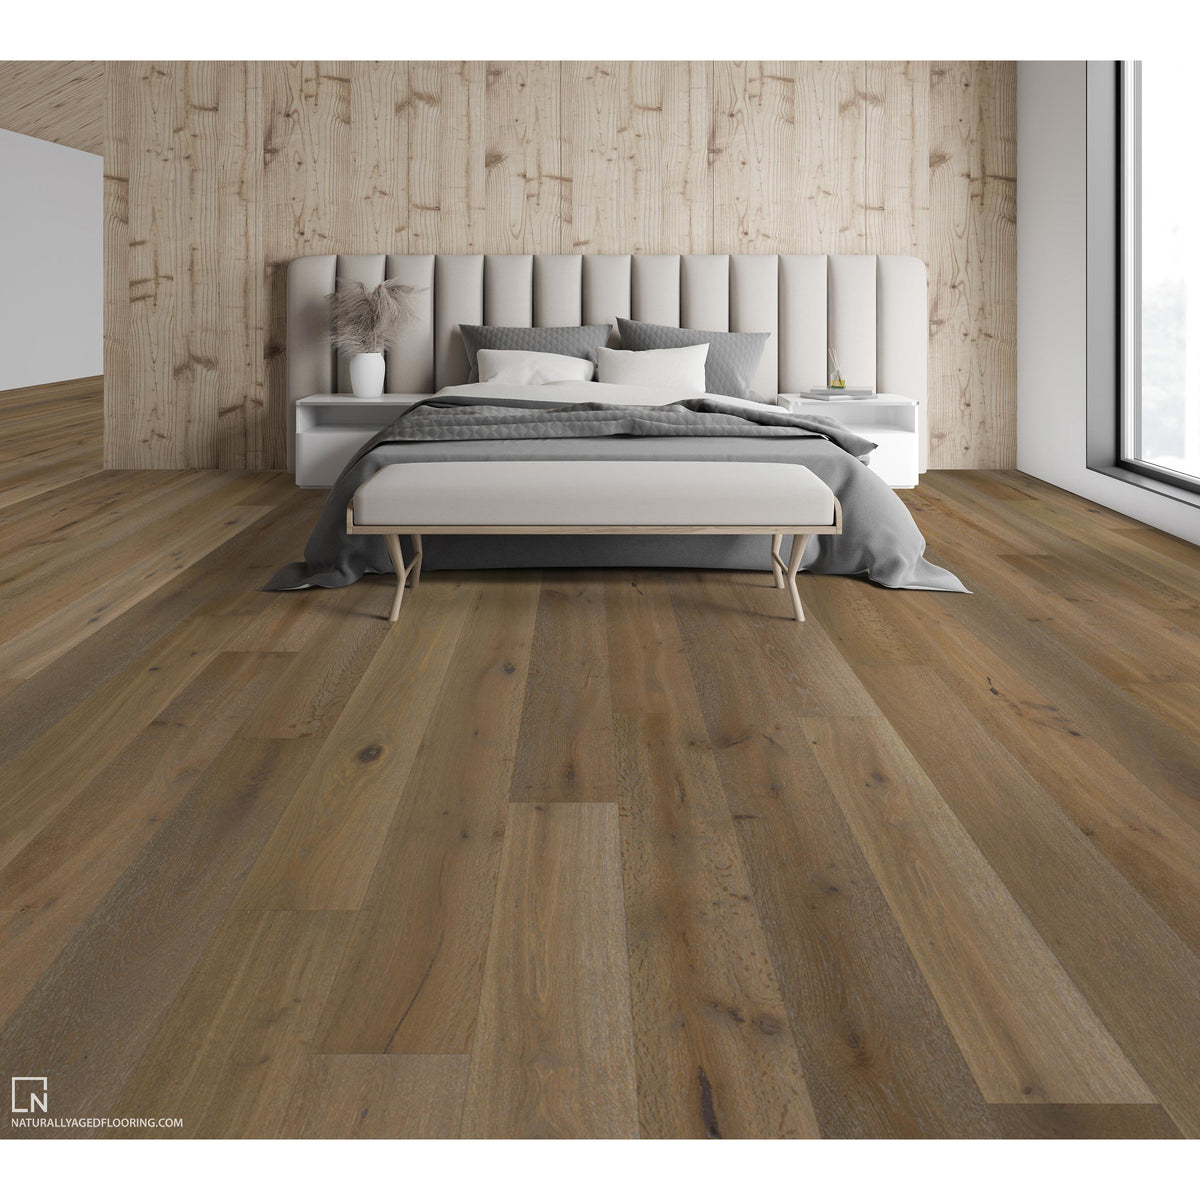 Naturally Aged Flooring - Pinnacle Collection - Capstone Room Scene